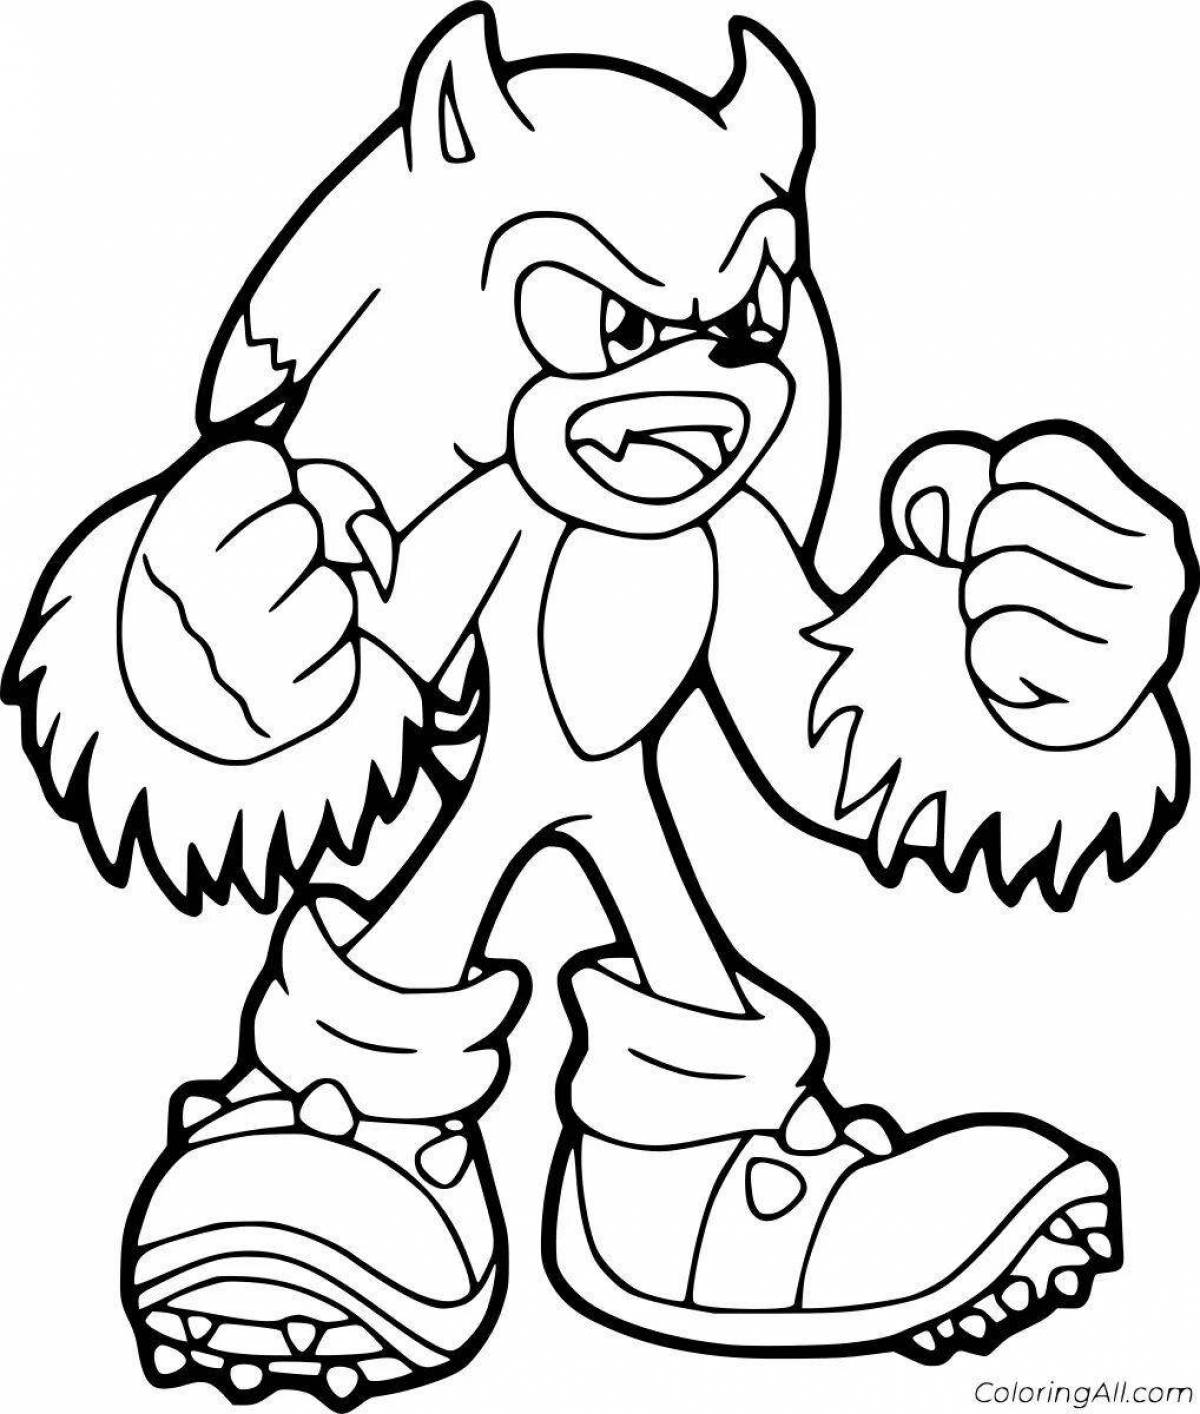 Dramatic coloring sonic werewolf